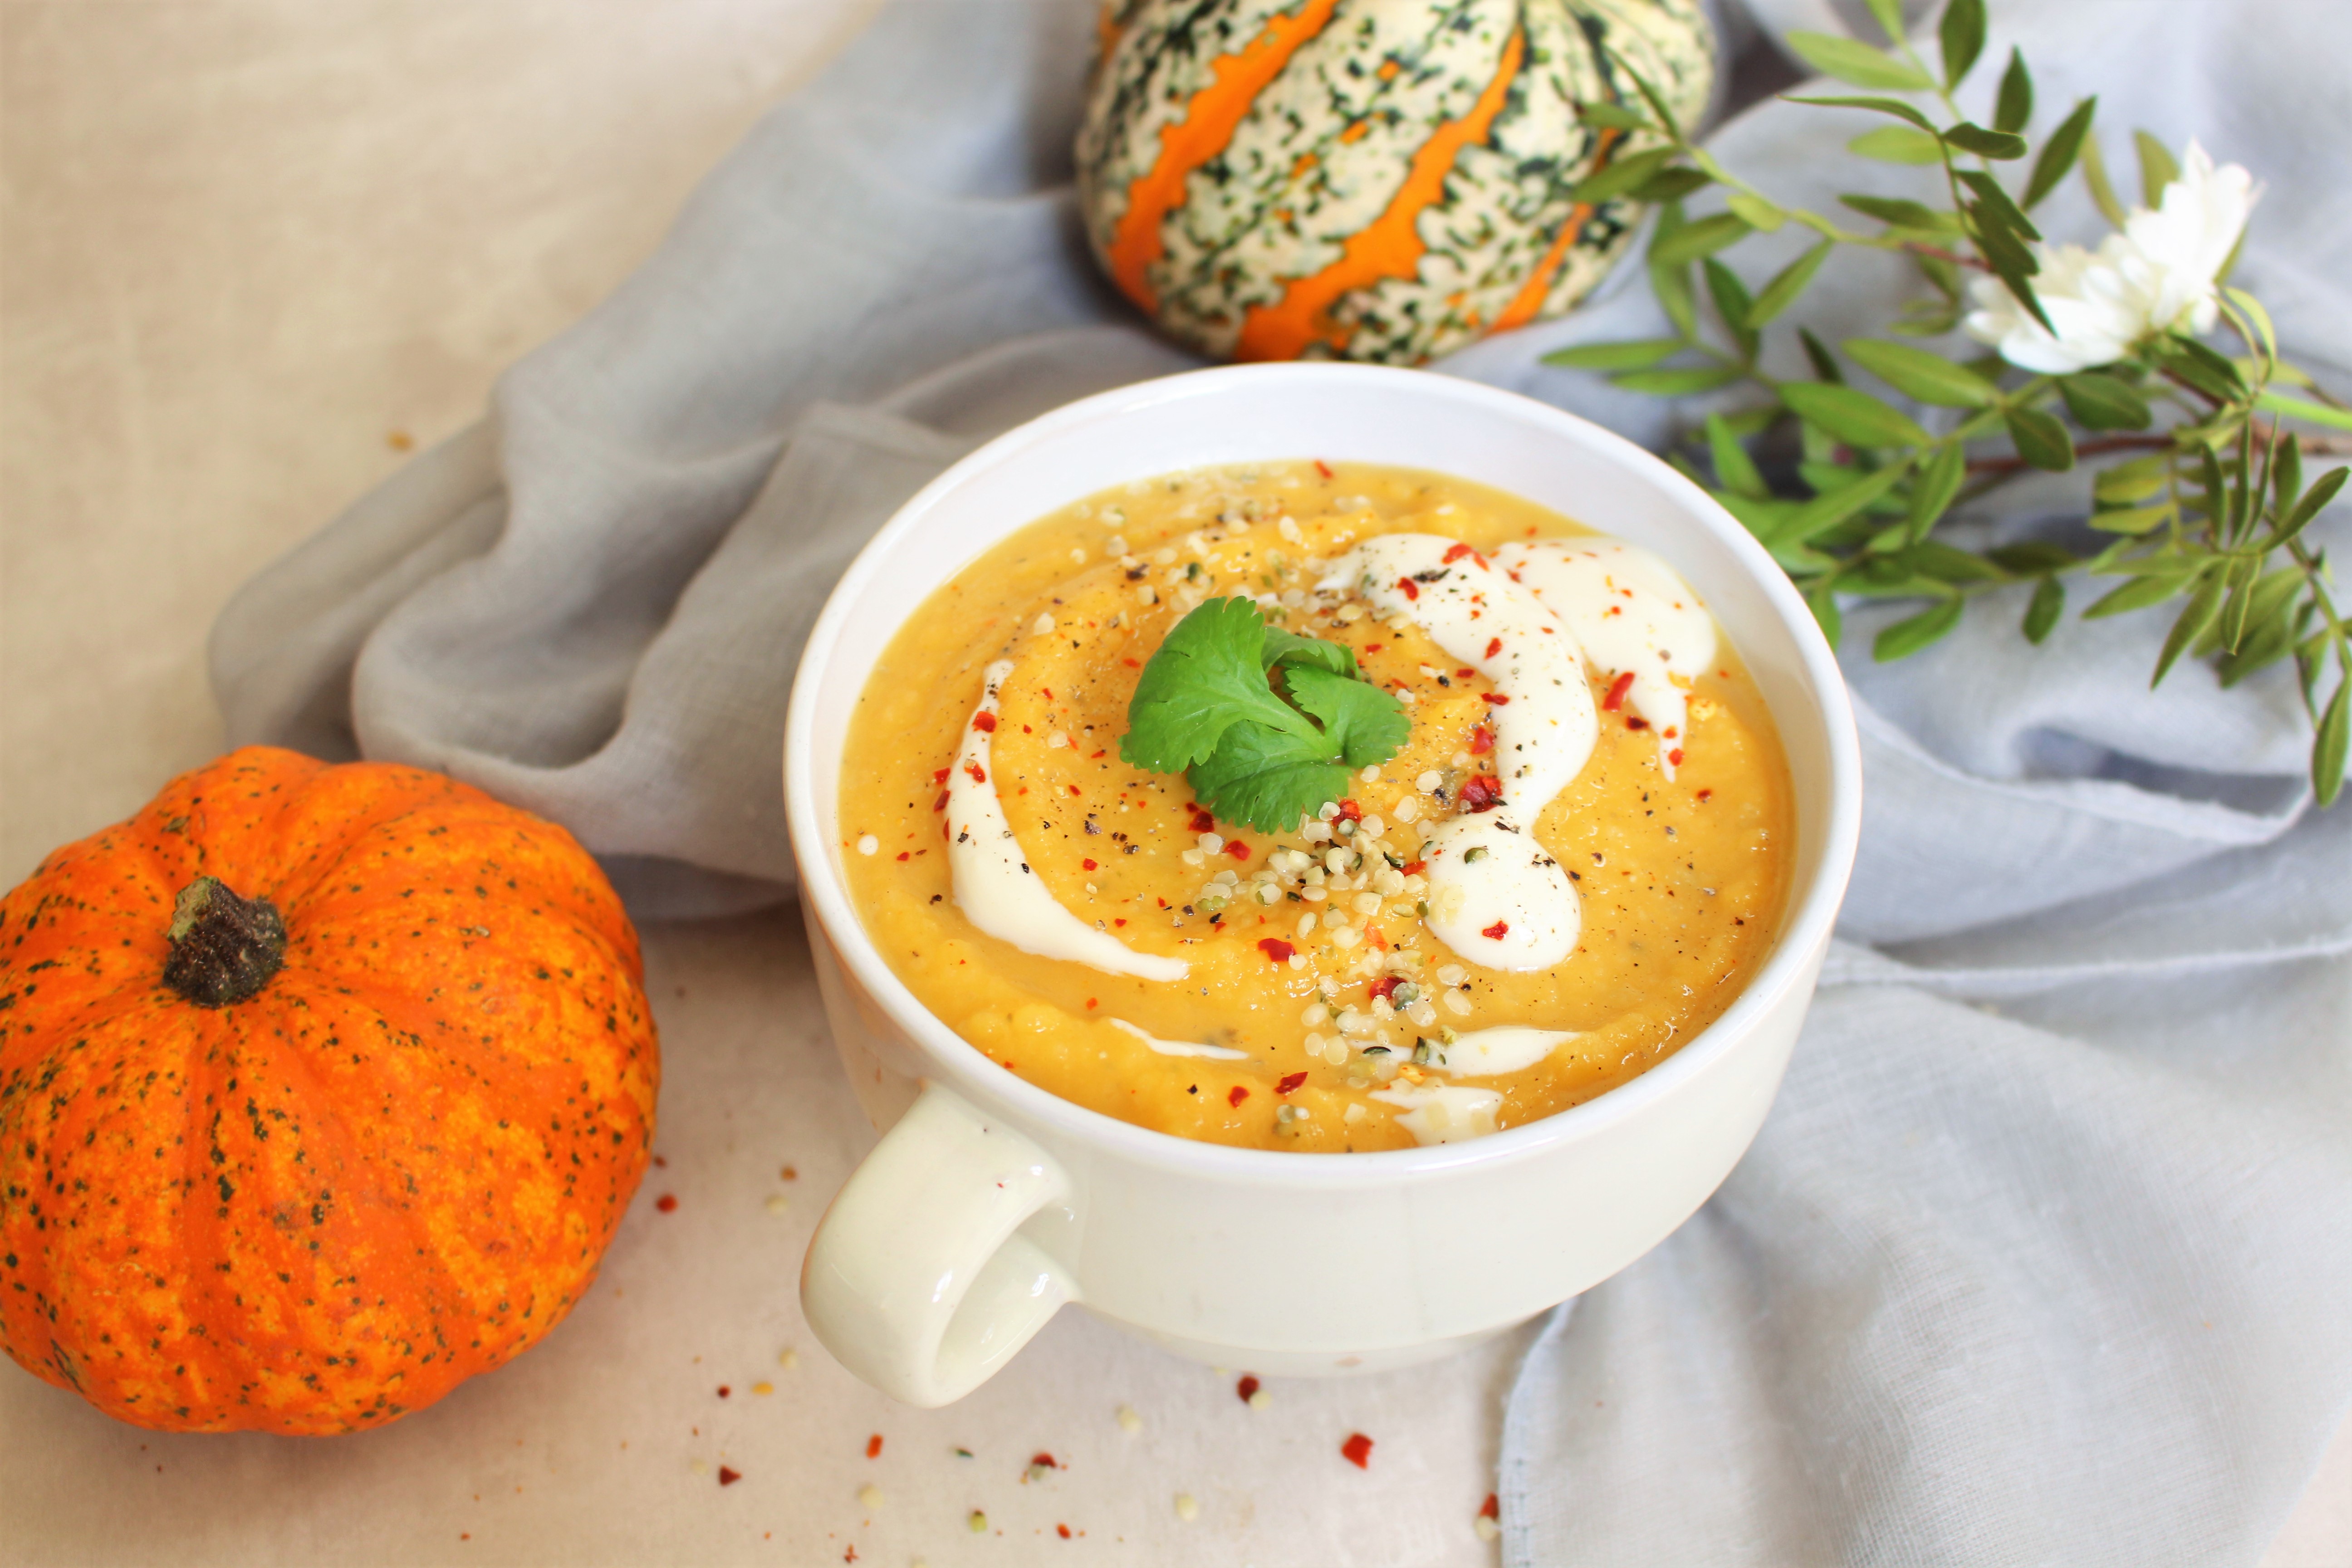 Rosemary Roasted Butternut Squash and Hemp Soup